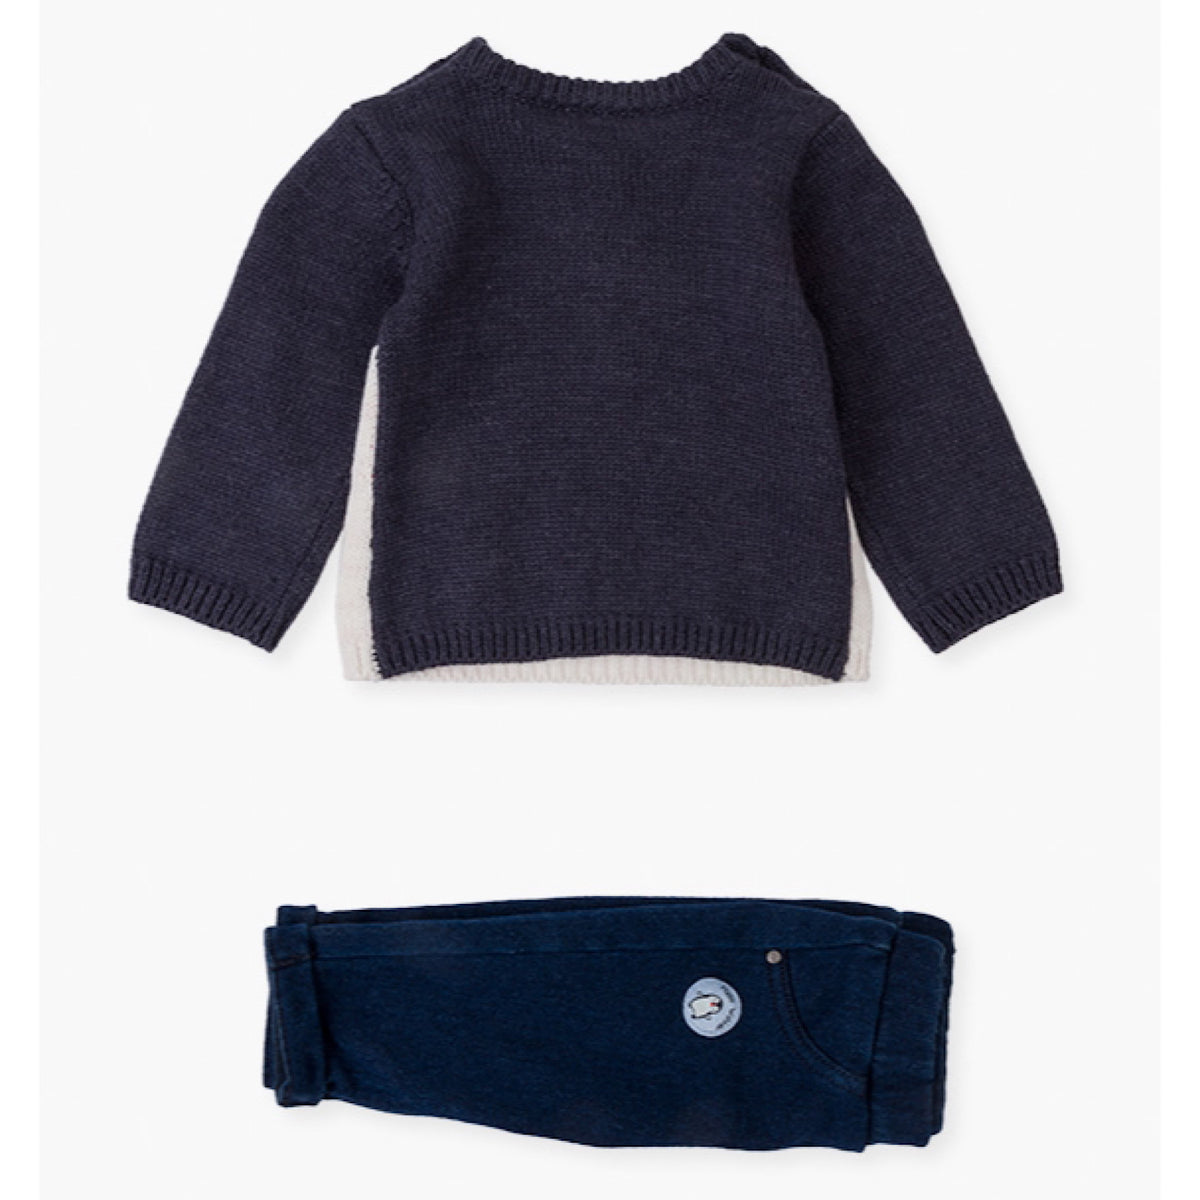 Knit Penguin Sweater and Denim Trousers Set